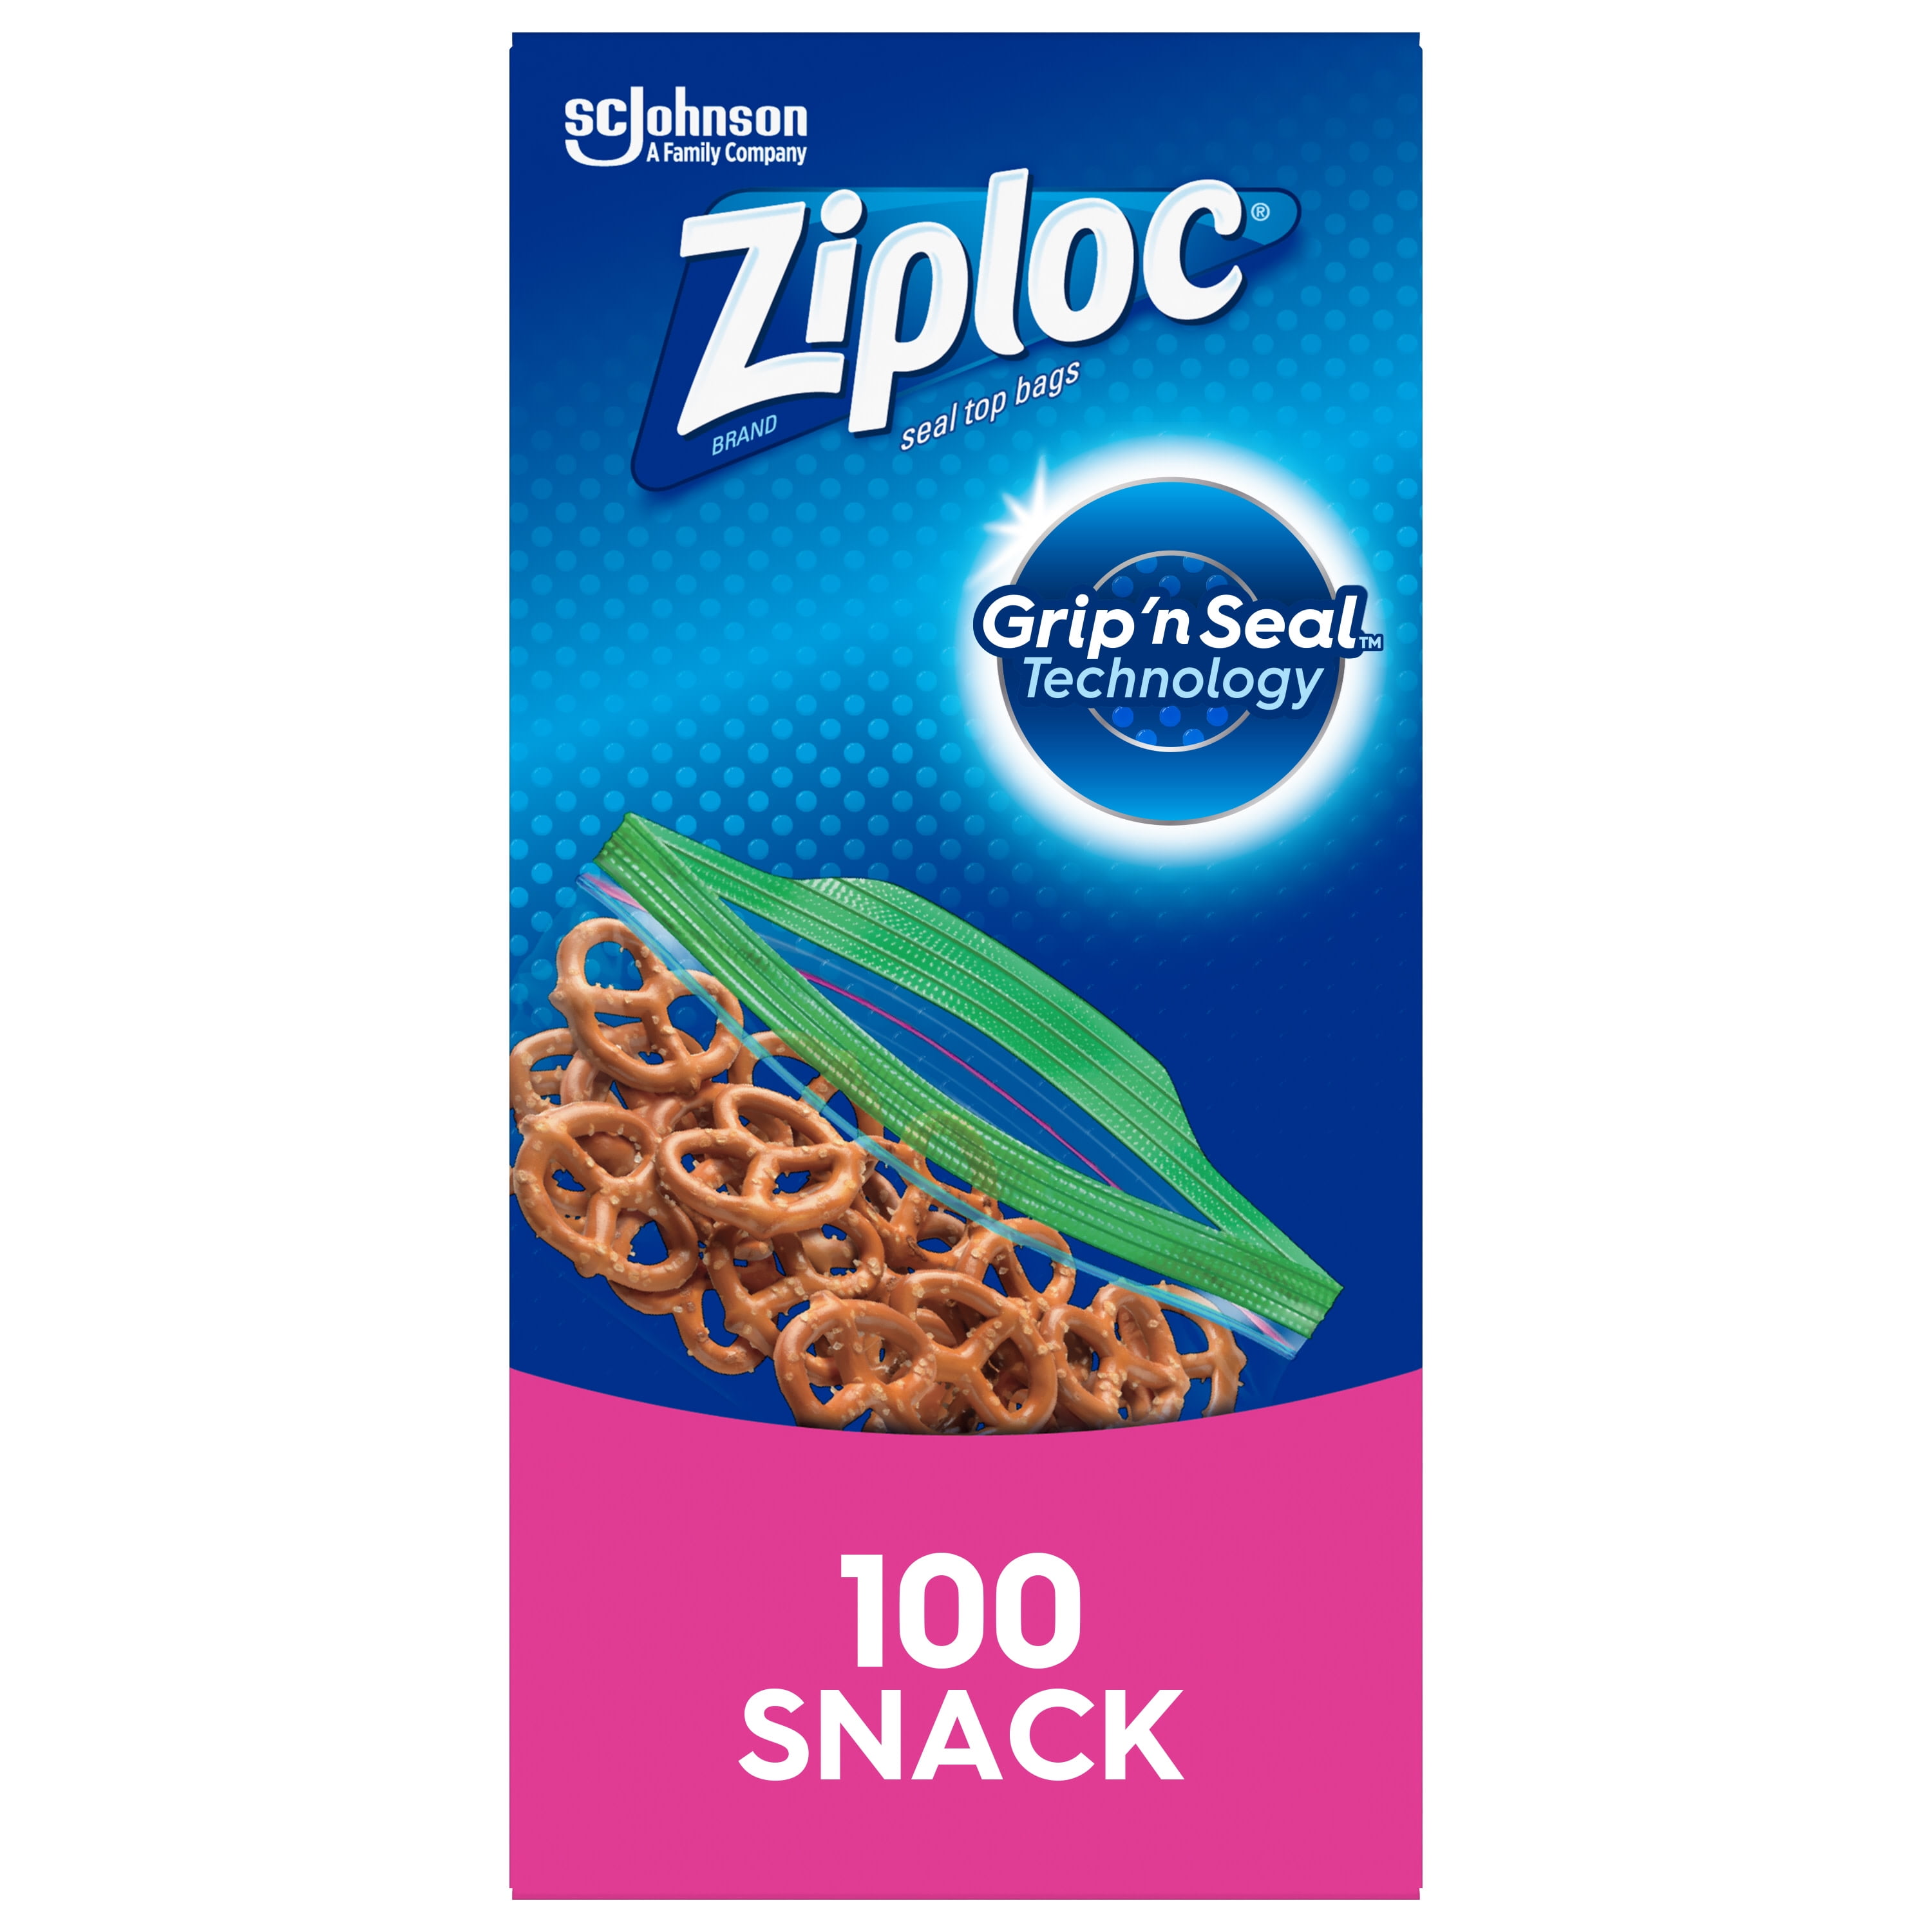 Ziploc Brand Sandwich Bags with Grip n Seal Technology, Pack of 1 40 Count